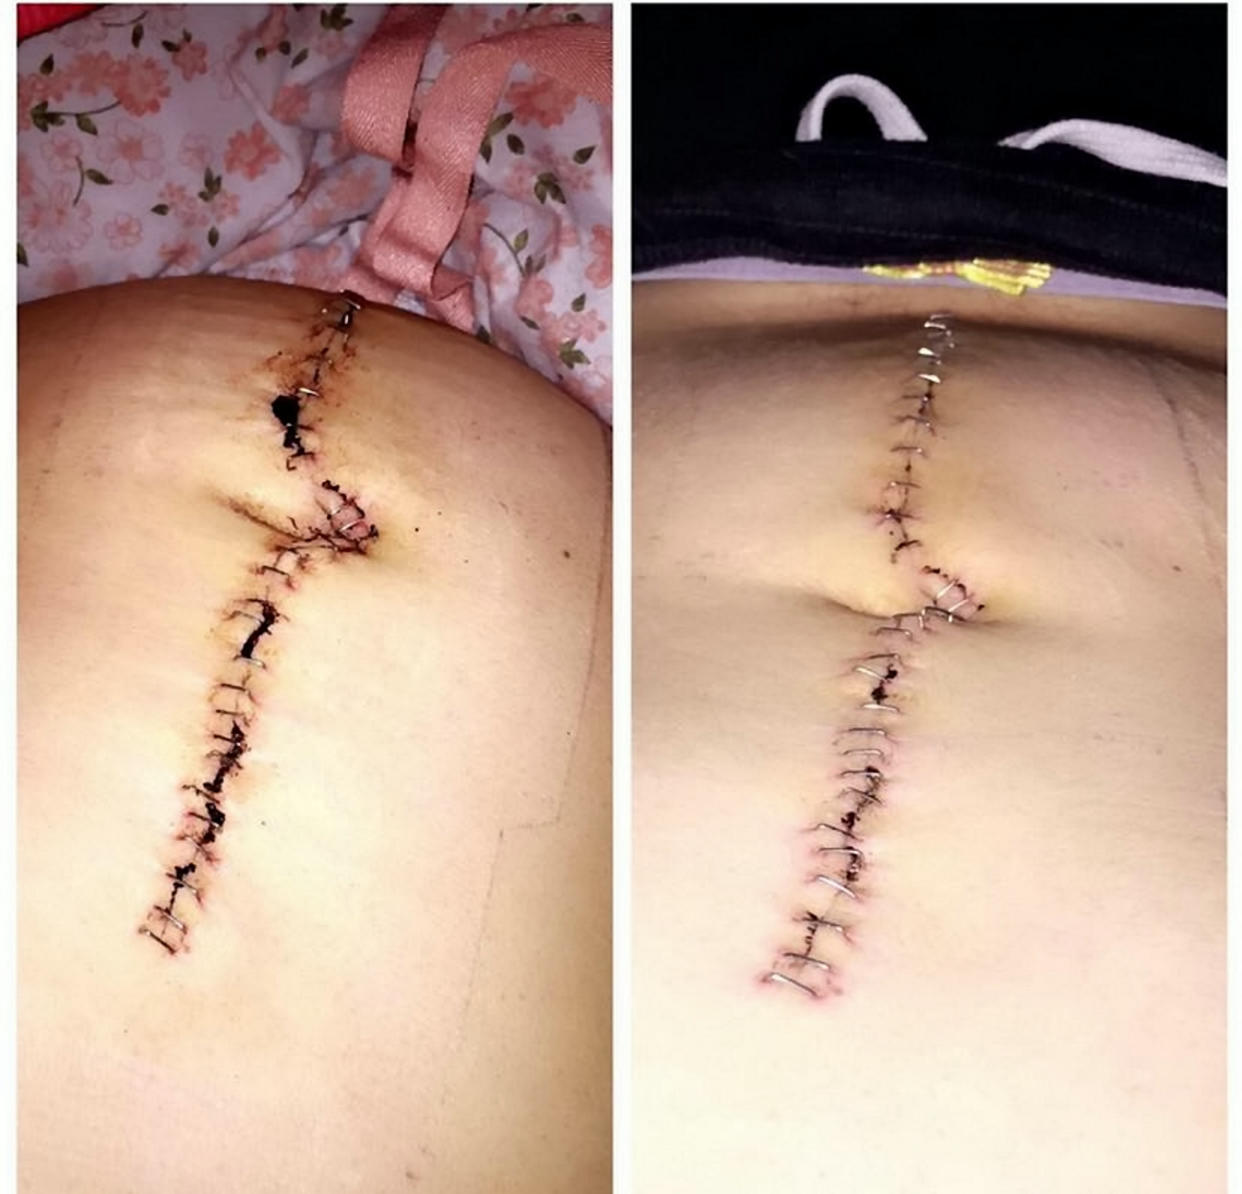 Katie's stitches from surgery. (SWNS)